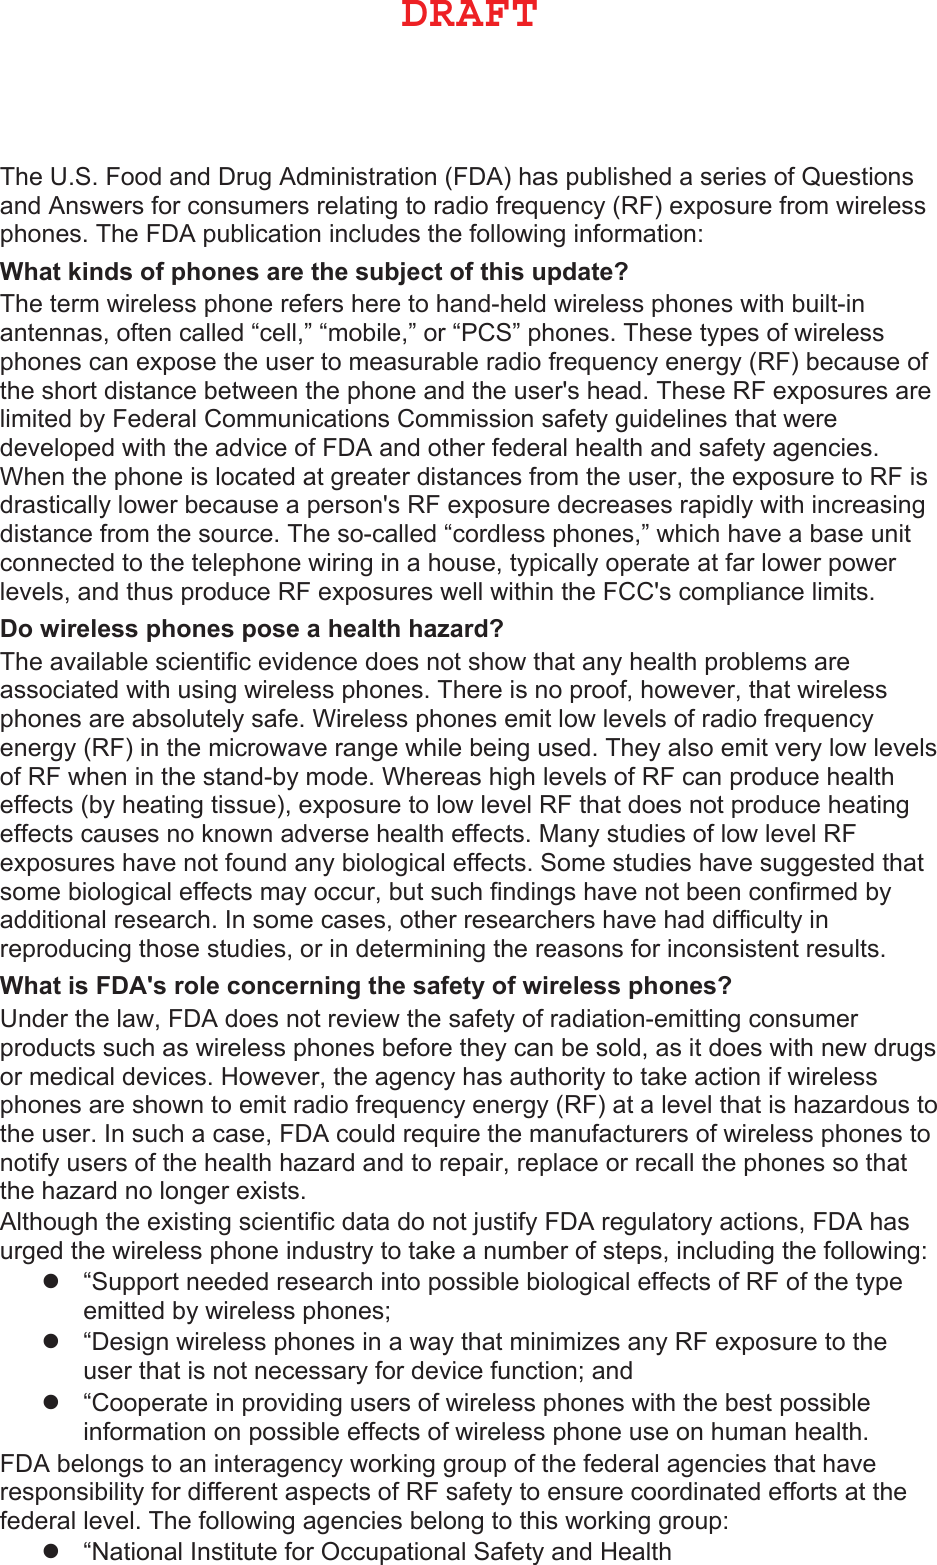 The U.S. Food and Drug Administration (FDA) has published a series of Questions and Answers for consumers relating to radio frequency (RF) exposure from wireless phones. The FDA publication includes the following information::KDWNLQGVRISKRQHVDUHWKHVXEMHFWRIWKLVXSGDWH&quot; The term wireless phone refers here to hand-held wireless phones with built-in antennas, often called “cell,” “mobile,” or “PCS” phones. These types of wireless phones can expose the user to measurable radio frequency energy (RF) because of the short distance between the phone and the user&apos;s head. These RF exposures are limited by Federal Communications Commission safety guidelines that were developed with the advice of FDA and other federal health and safety agencies. When the phone is located at greater distances from the user, the exposure to RF is drastically lower because a person&apos;s RF exposure decreases rapidly with increasing distance from the source. The so-called “cordless phones,” which have a base unit connected to the telephone wiring in a house, typically operate at far lower power levels, and thus produce RF exposures well within the FCC&apos;s compliance limits.&apos;RZLUHOHVVSKRQHVSRVHDKHDOWKKD]DUG&quot; The available scientific evidence does not show that any health problems are associated with using wireless phones. There is no proof, however, that wireless phones are absolutely safe. Wireless phones emit low levels of radio frequency energy (RF) in the microwave range while being used. They also emit very low levels of RF when in the stand-by mode. Whereas high levels of RF can produce health effects (by heating tissue), exposure to low level RF that does not produce heating effects causes no known adverse health effects. Many studies of low level RF exposures have not found any biological effects. Some studies have suggested that some biological effects may occur, but such findings have not been confirmed by additional research. In some cases, other researchers have had difficulty in reproducing those studies, or in determining the reasons for inconsistent results.:KDWLV)&apos;$VUROHFRQFHUQLQJWKHVDIHW\RIZLUHOHVVSKRQHV&quot; Under the law, FDA does not review the safety of radiation-emitting consumer products such as wireless phones before they can be sold, as it does with new drugs or medical devices. However, the agency has authority to take action if wireless phones are shown to emit radio frequency energy (RF) at a level that is hazardous to the user. In such a case, FDA could require the manufacturers of wireless phones to notify users of the health hazard and to repair, replace or recall the phones so that the hazard no longer exists.Although the existing scientific data do not justify FDA regulatory actions, FDA has urged the wireless phone industry to take a number of steps, including the following:z“Support needed research into possible biological effects of RF of the typeemitted by wireless phones;z“Design wireless phones in a way that minimizes any RF exposure to theuser that is not necessary for device function; andz“Cooperate in providing users of wireless phones with the best possibleinformation on possible effects of wireless phone use on human health.FDA belongs to an interagency working group of the federal agencies that have responsibility for different aspects of RF safety to ensure coordinated efforts at the federal level. The following agencies belong to this working group:z“National Institute for Occupational Safety and Health%3&quot;&apos;5